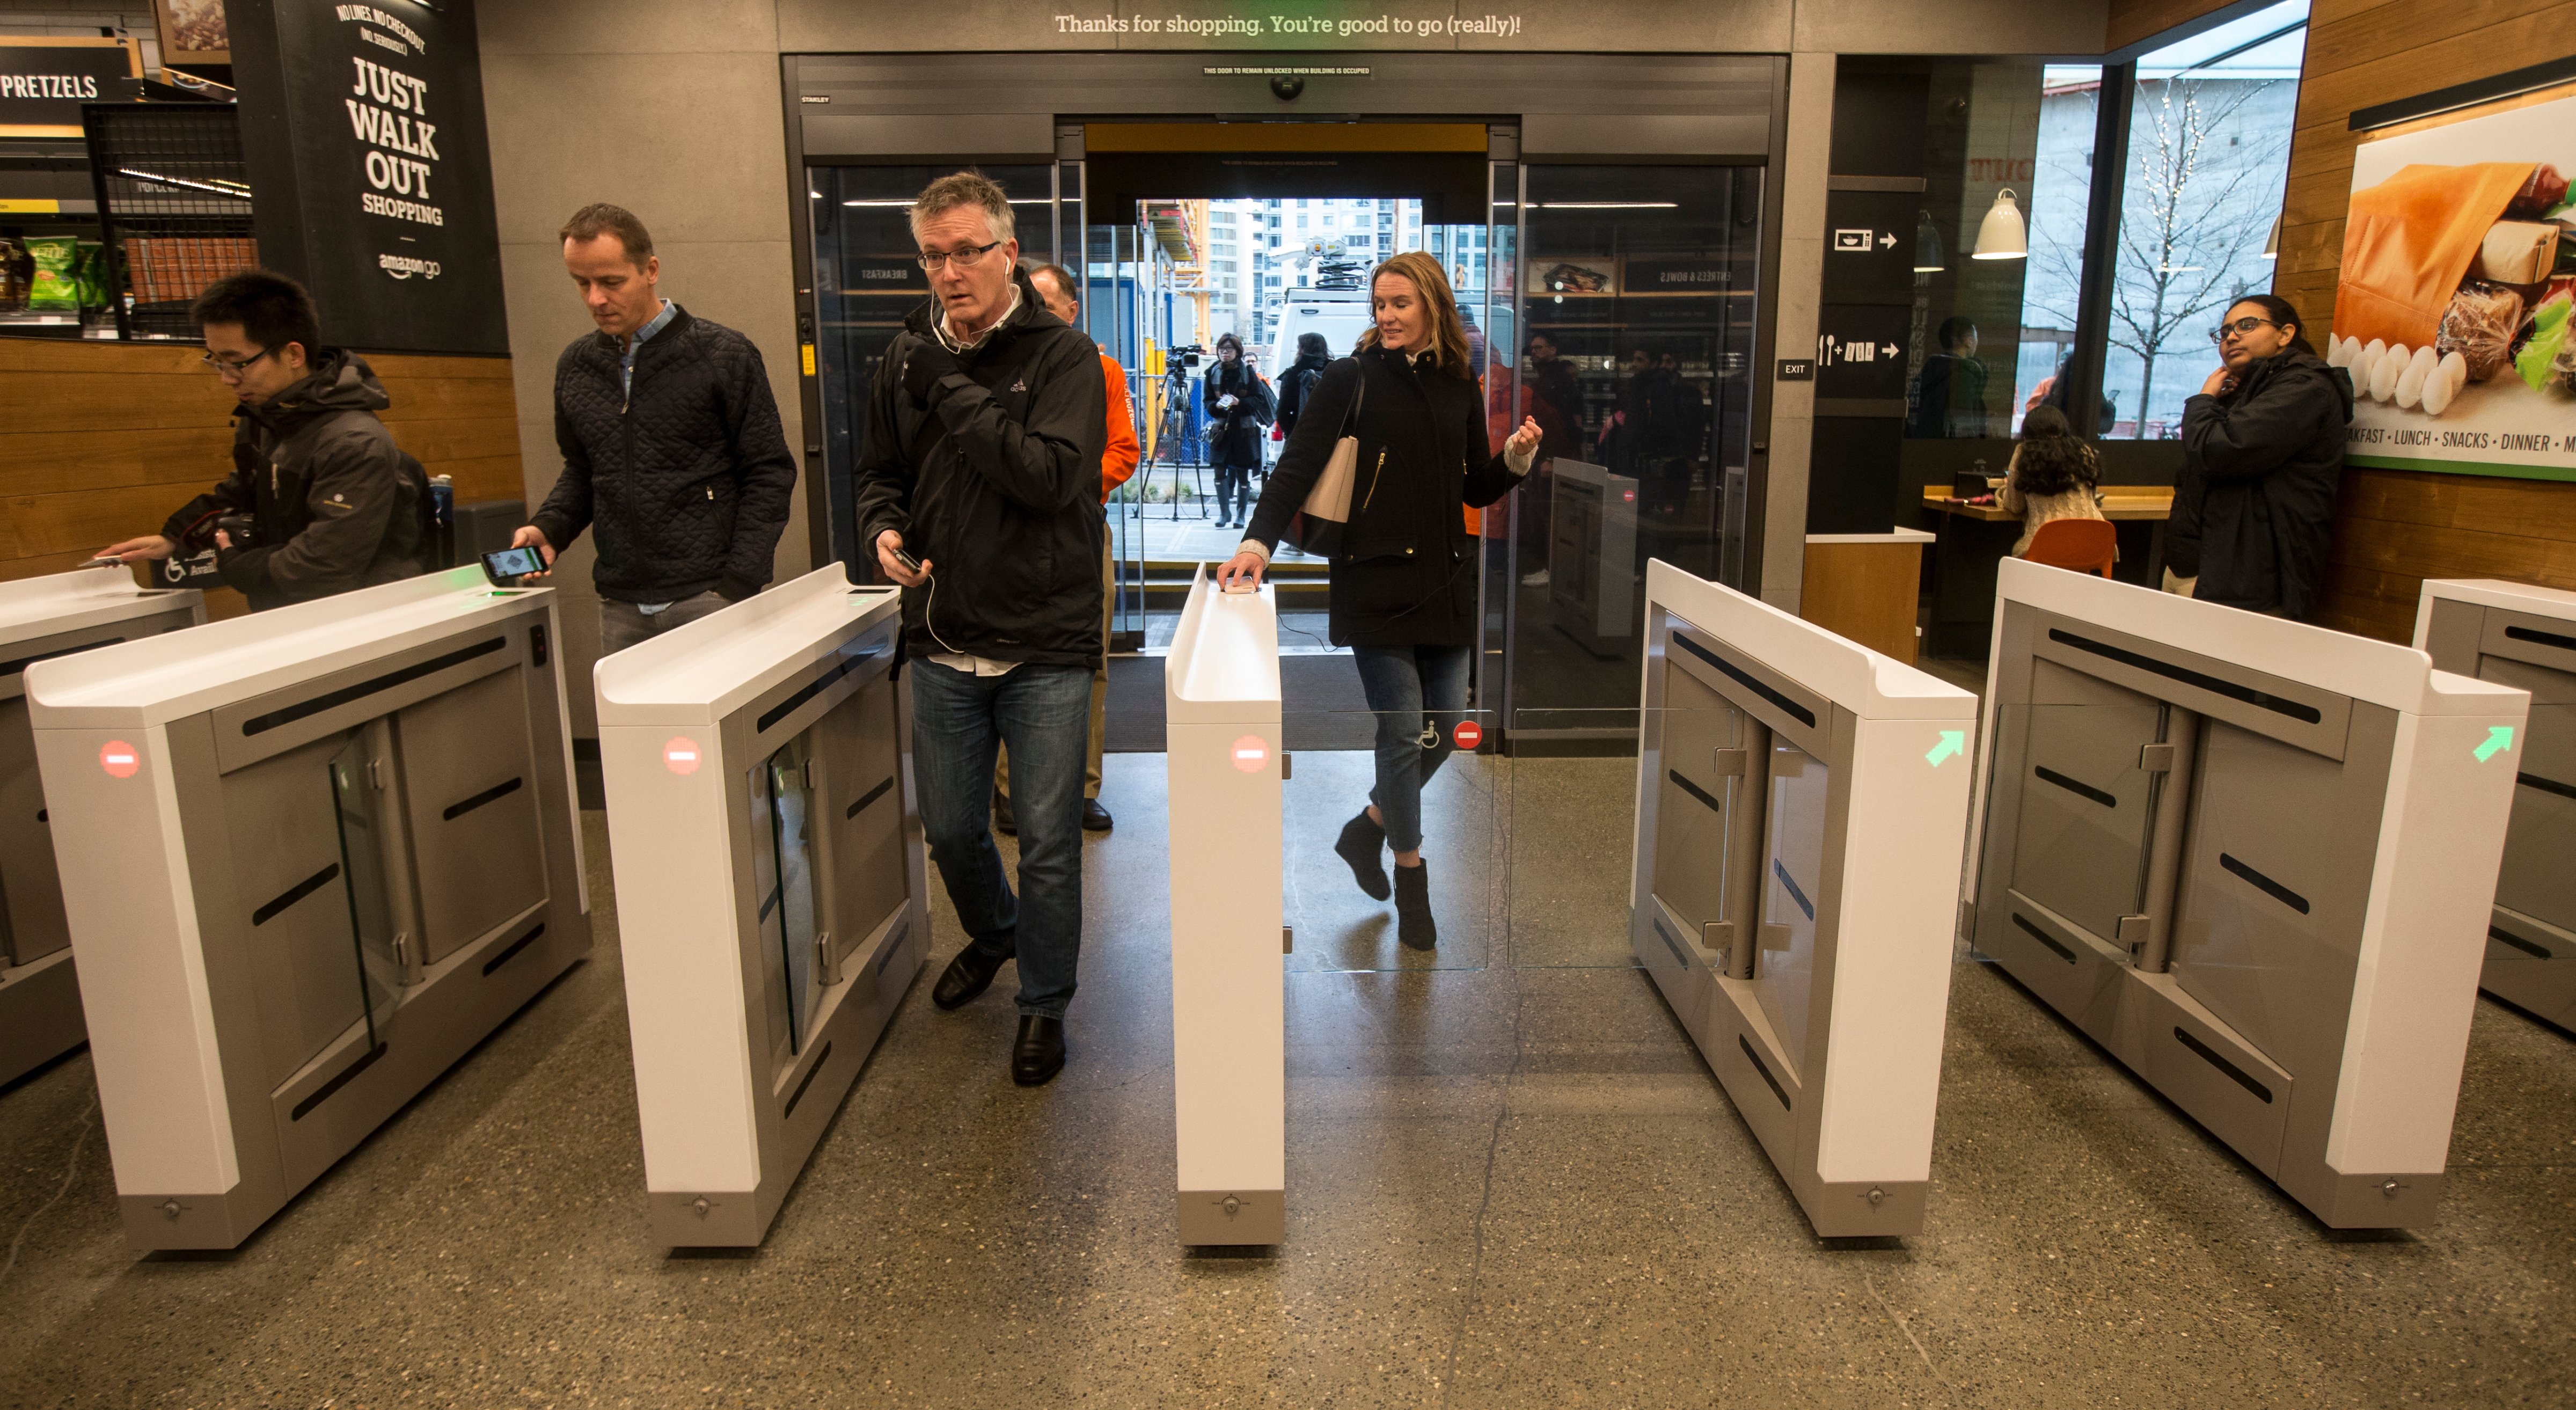 Shoppers scan the Amazon Go app on the mobile devices as the enter the Amazon Go store, on January 22, 2018 in Seattle, Washington. (Stephen Brashear—Getty Images)